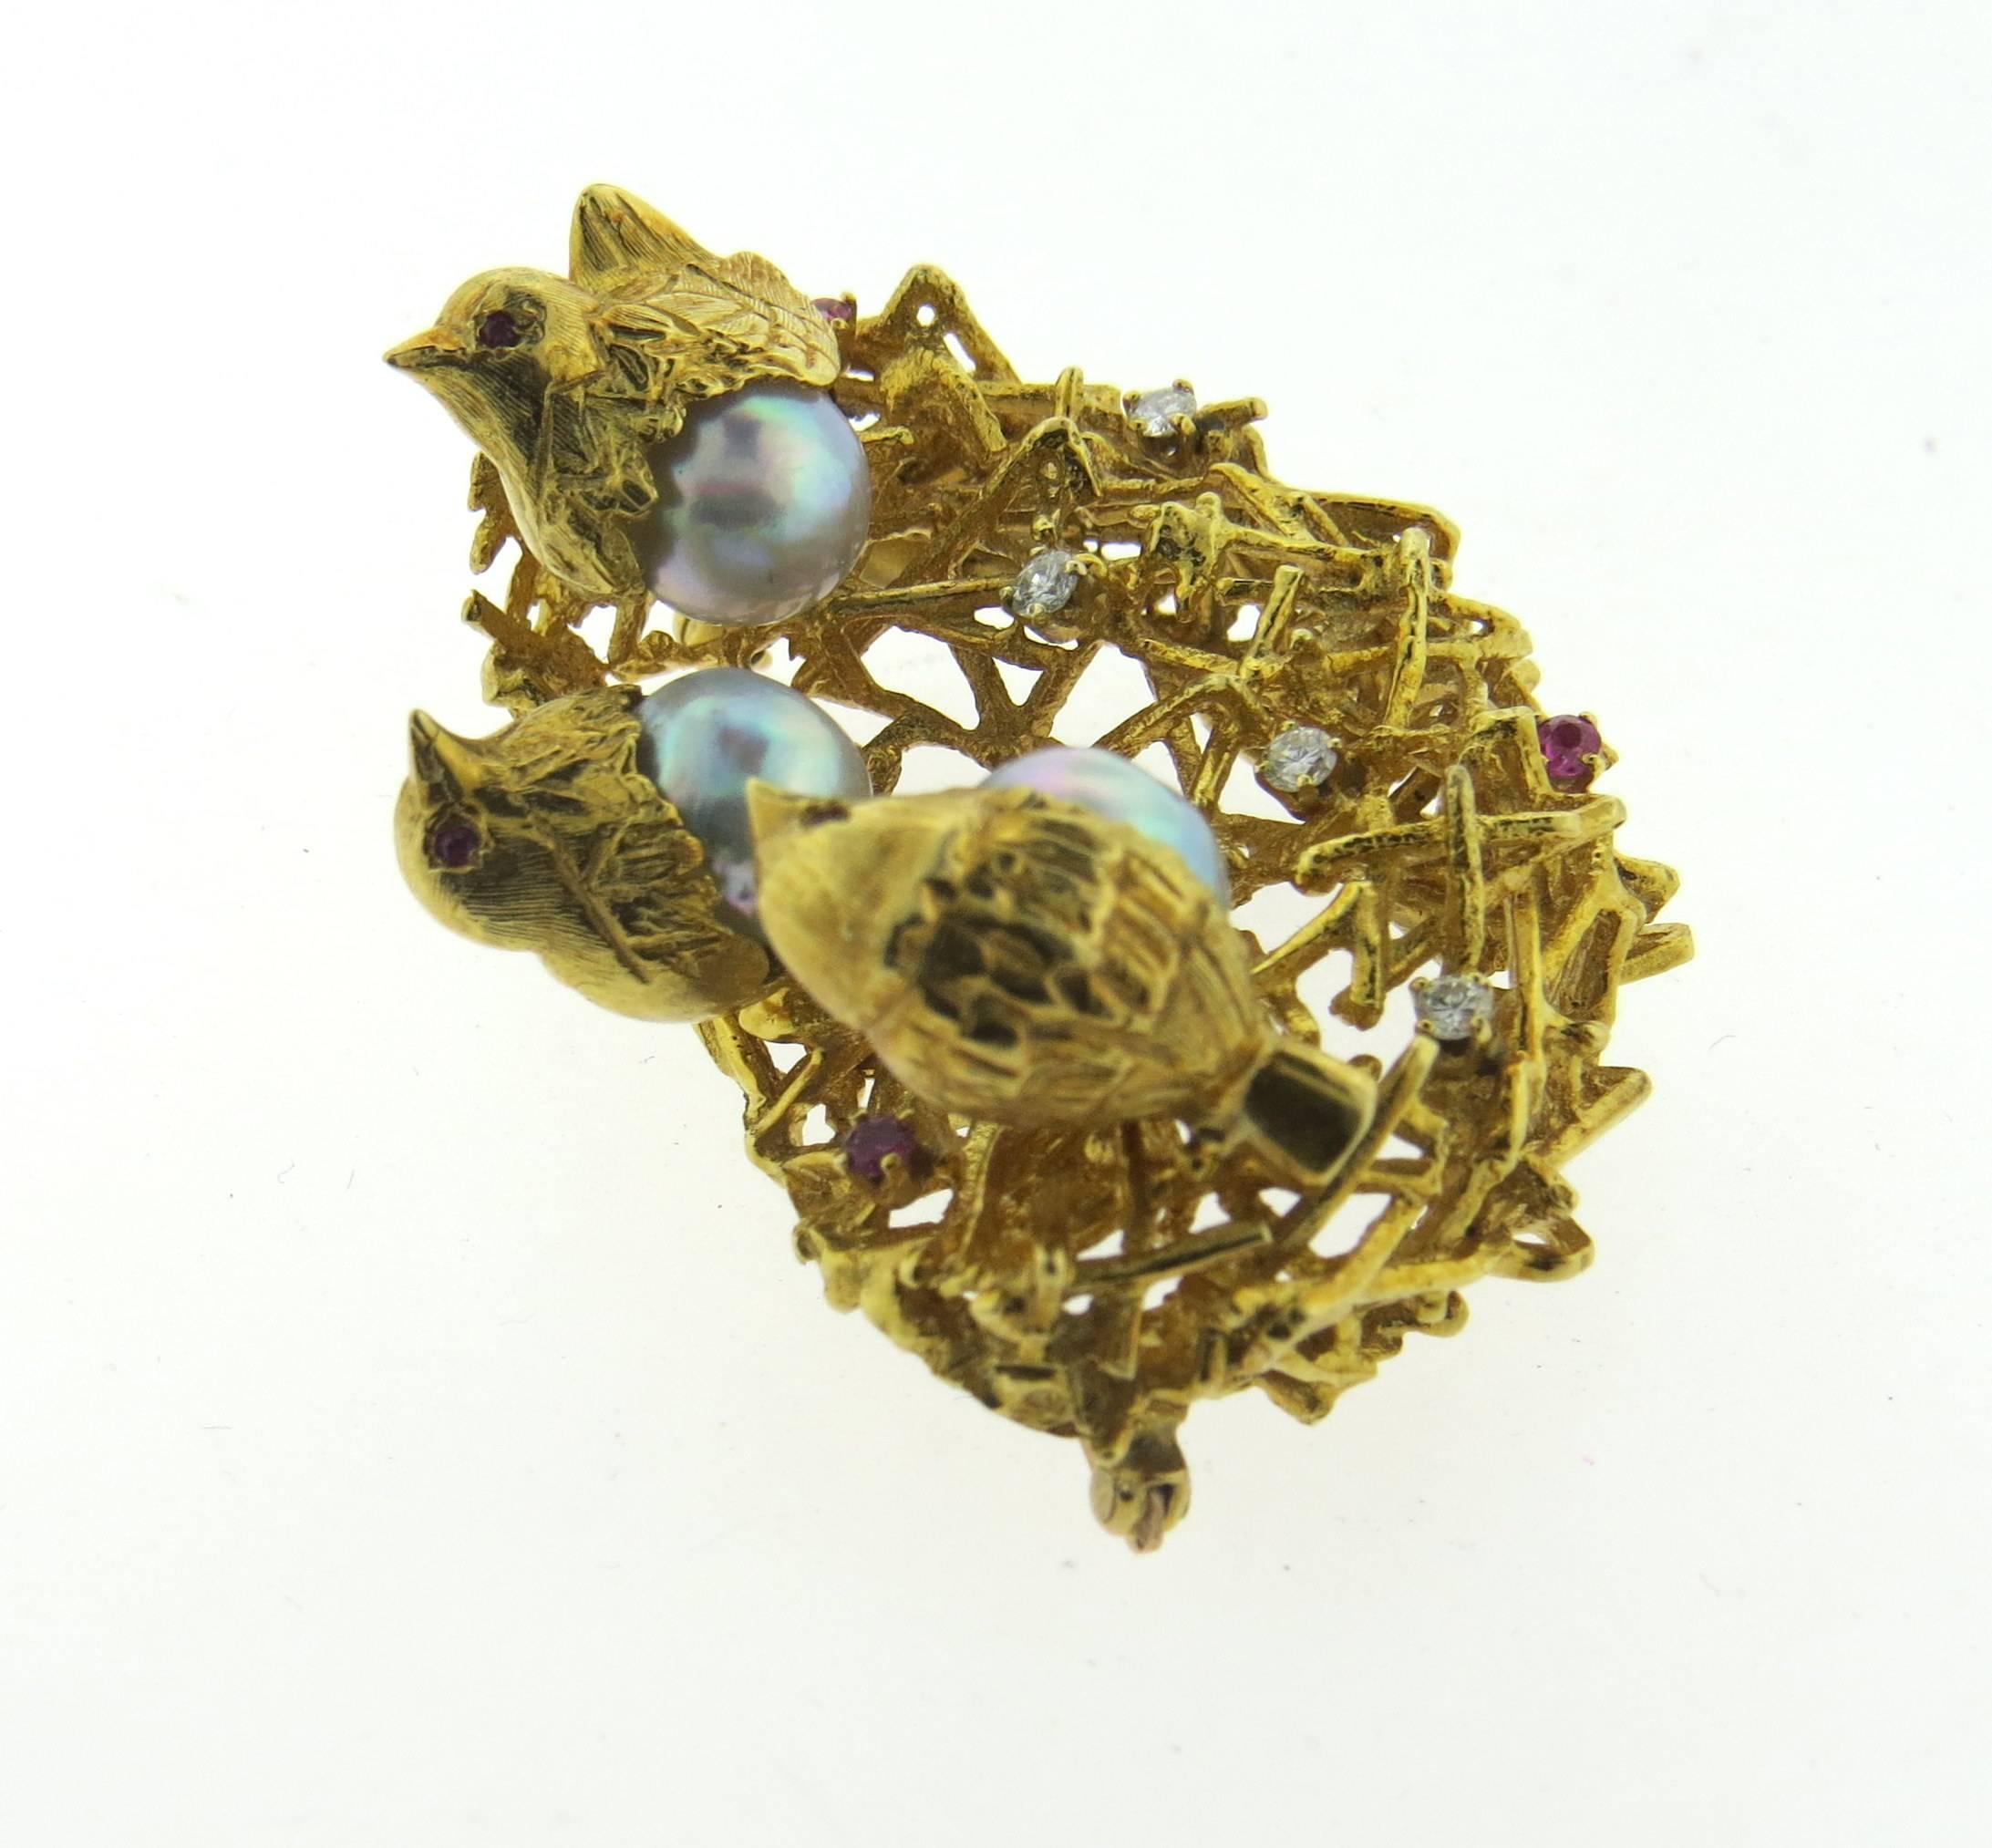 Adorable 18k yellow gold brooch, depicting three birds in a nest, decorated with three 8mm pearls, approx. 0.25ctw in diamonds and rubies. Brooch measures 48mm x 40mm. Weight of the piece - 35.5 grams 